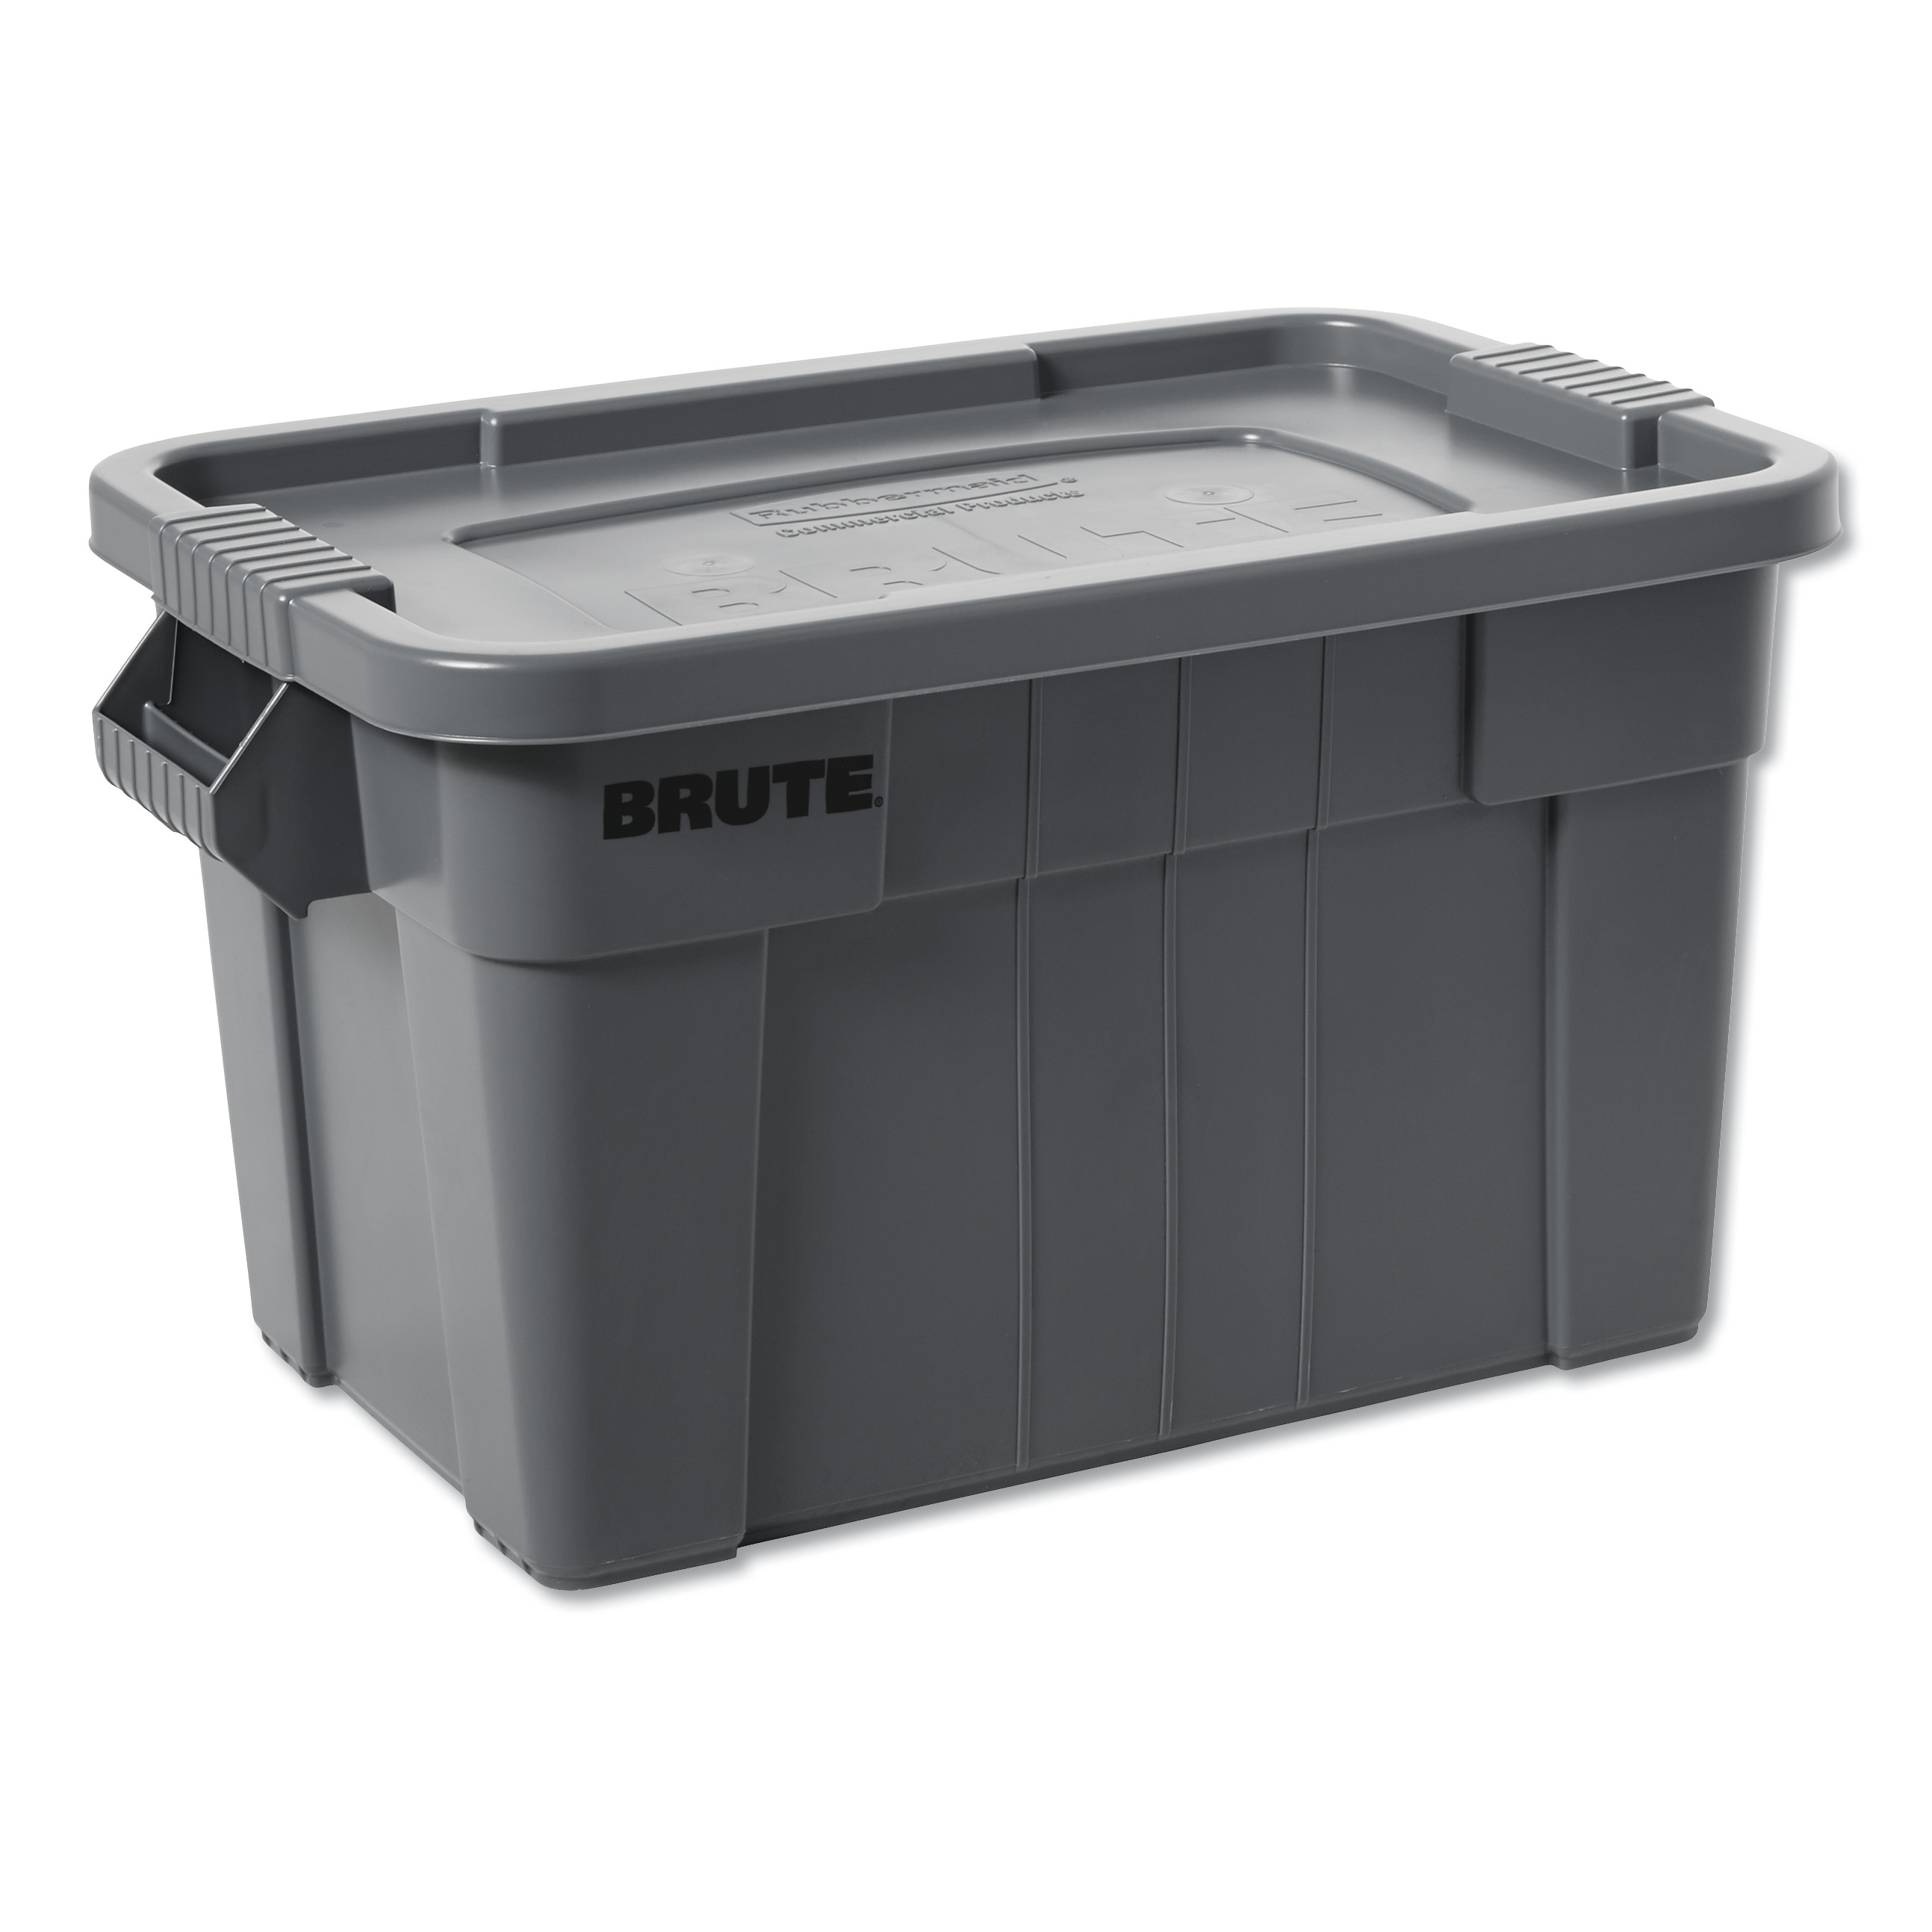 Rubbermaid® Commercial BRUTE Tote with Lid, 14 gal, 27.5 x 16.75 x 10.75, Gray